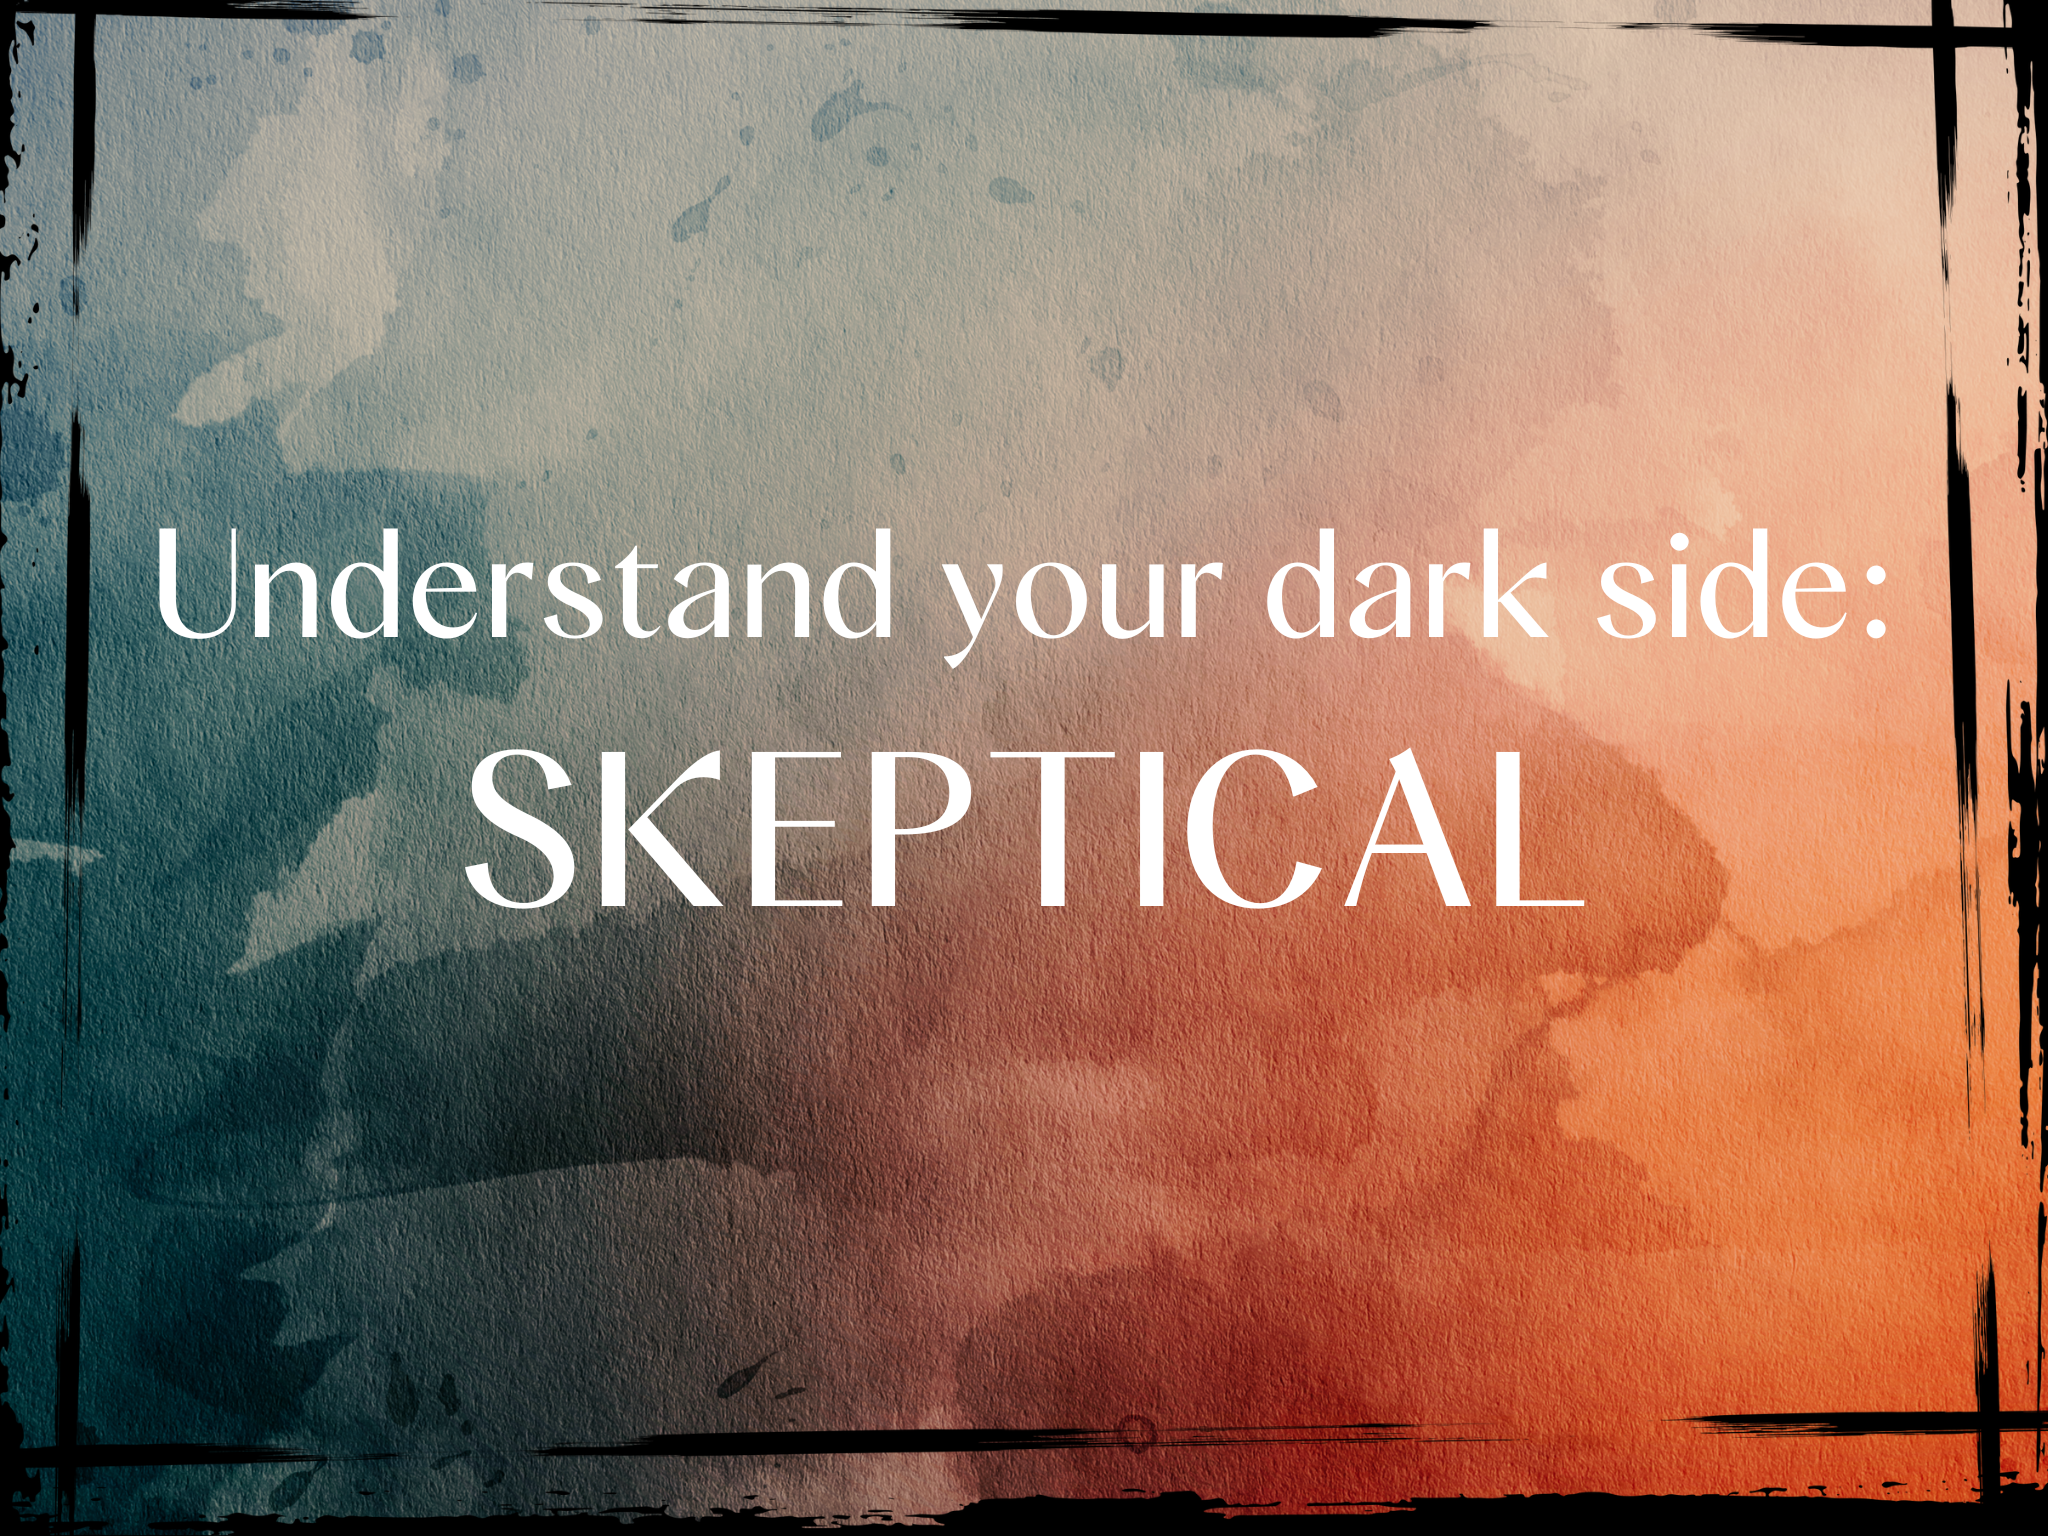 Skeptical - the dark side of personality